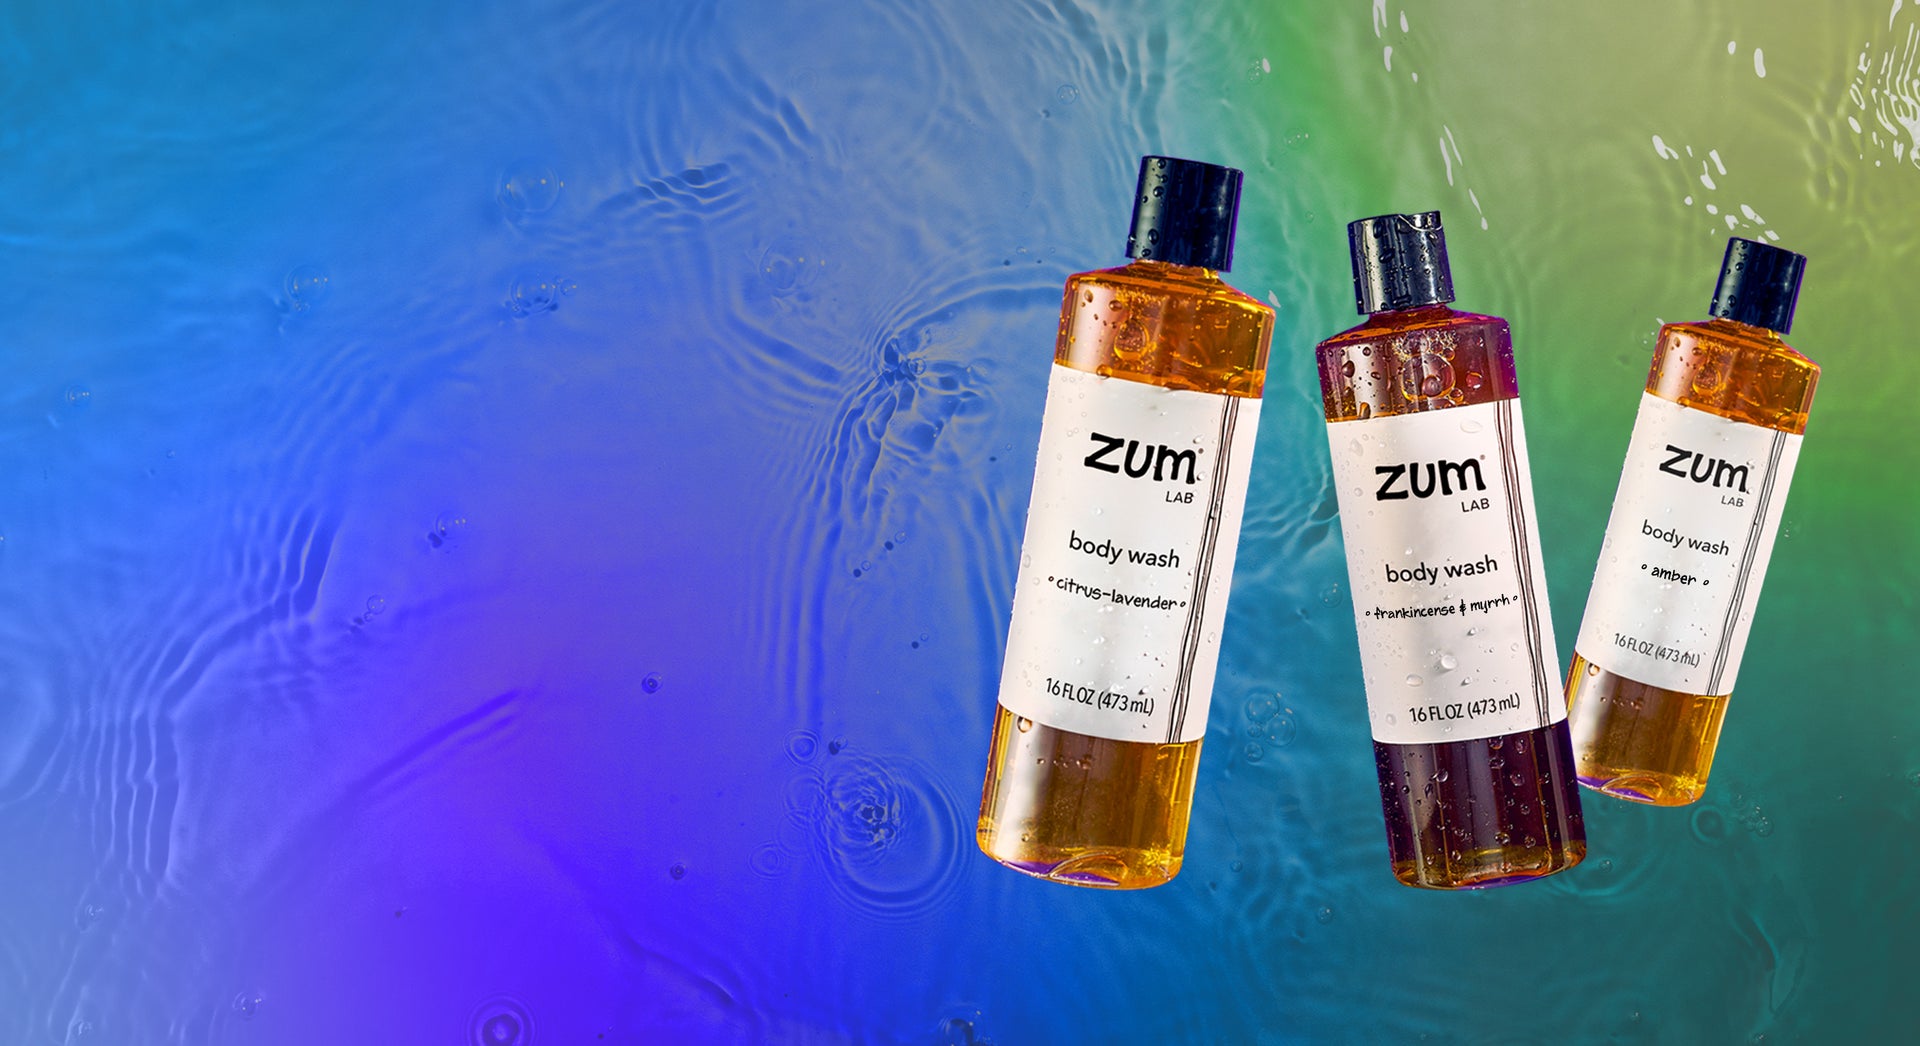 Citrus-Lavender, Frankincense & Myrrh, and Amber scented Zum Lab Body Wash bottles flying in the air. Water background with a blue, purple, green gradient overlay.